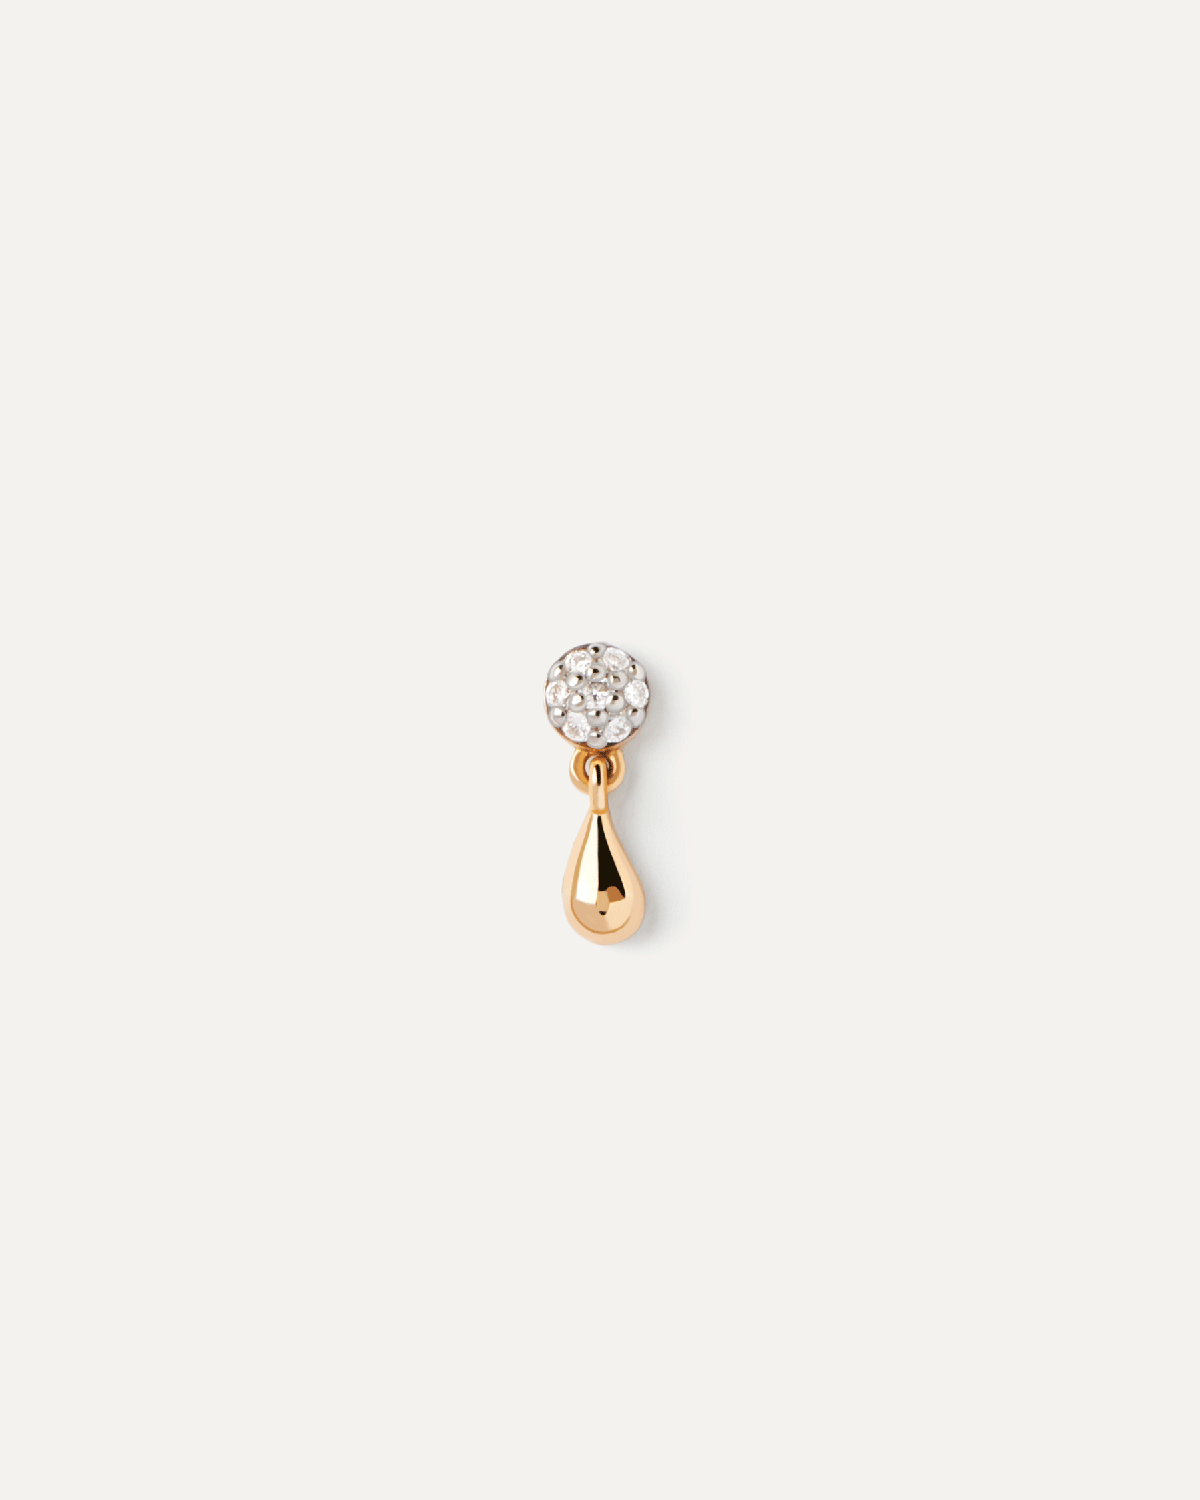 Diamonds and gold Noe single earring. Dainty ear piercing in solid yellow gold set with pavé lab-grown diamonds and a small drop pendant. Get the latest arrival from PDPAOLA. Place your order safely and get this Best Seller.